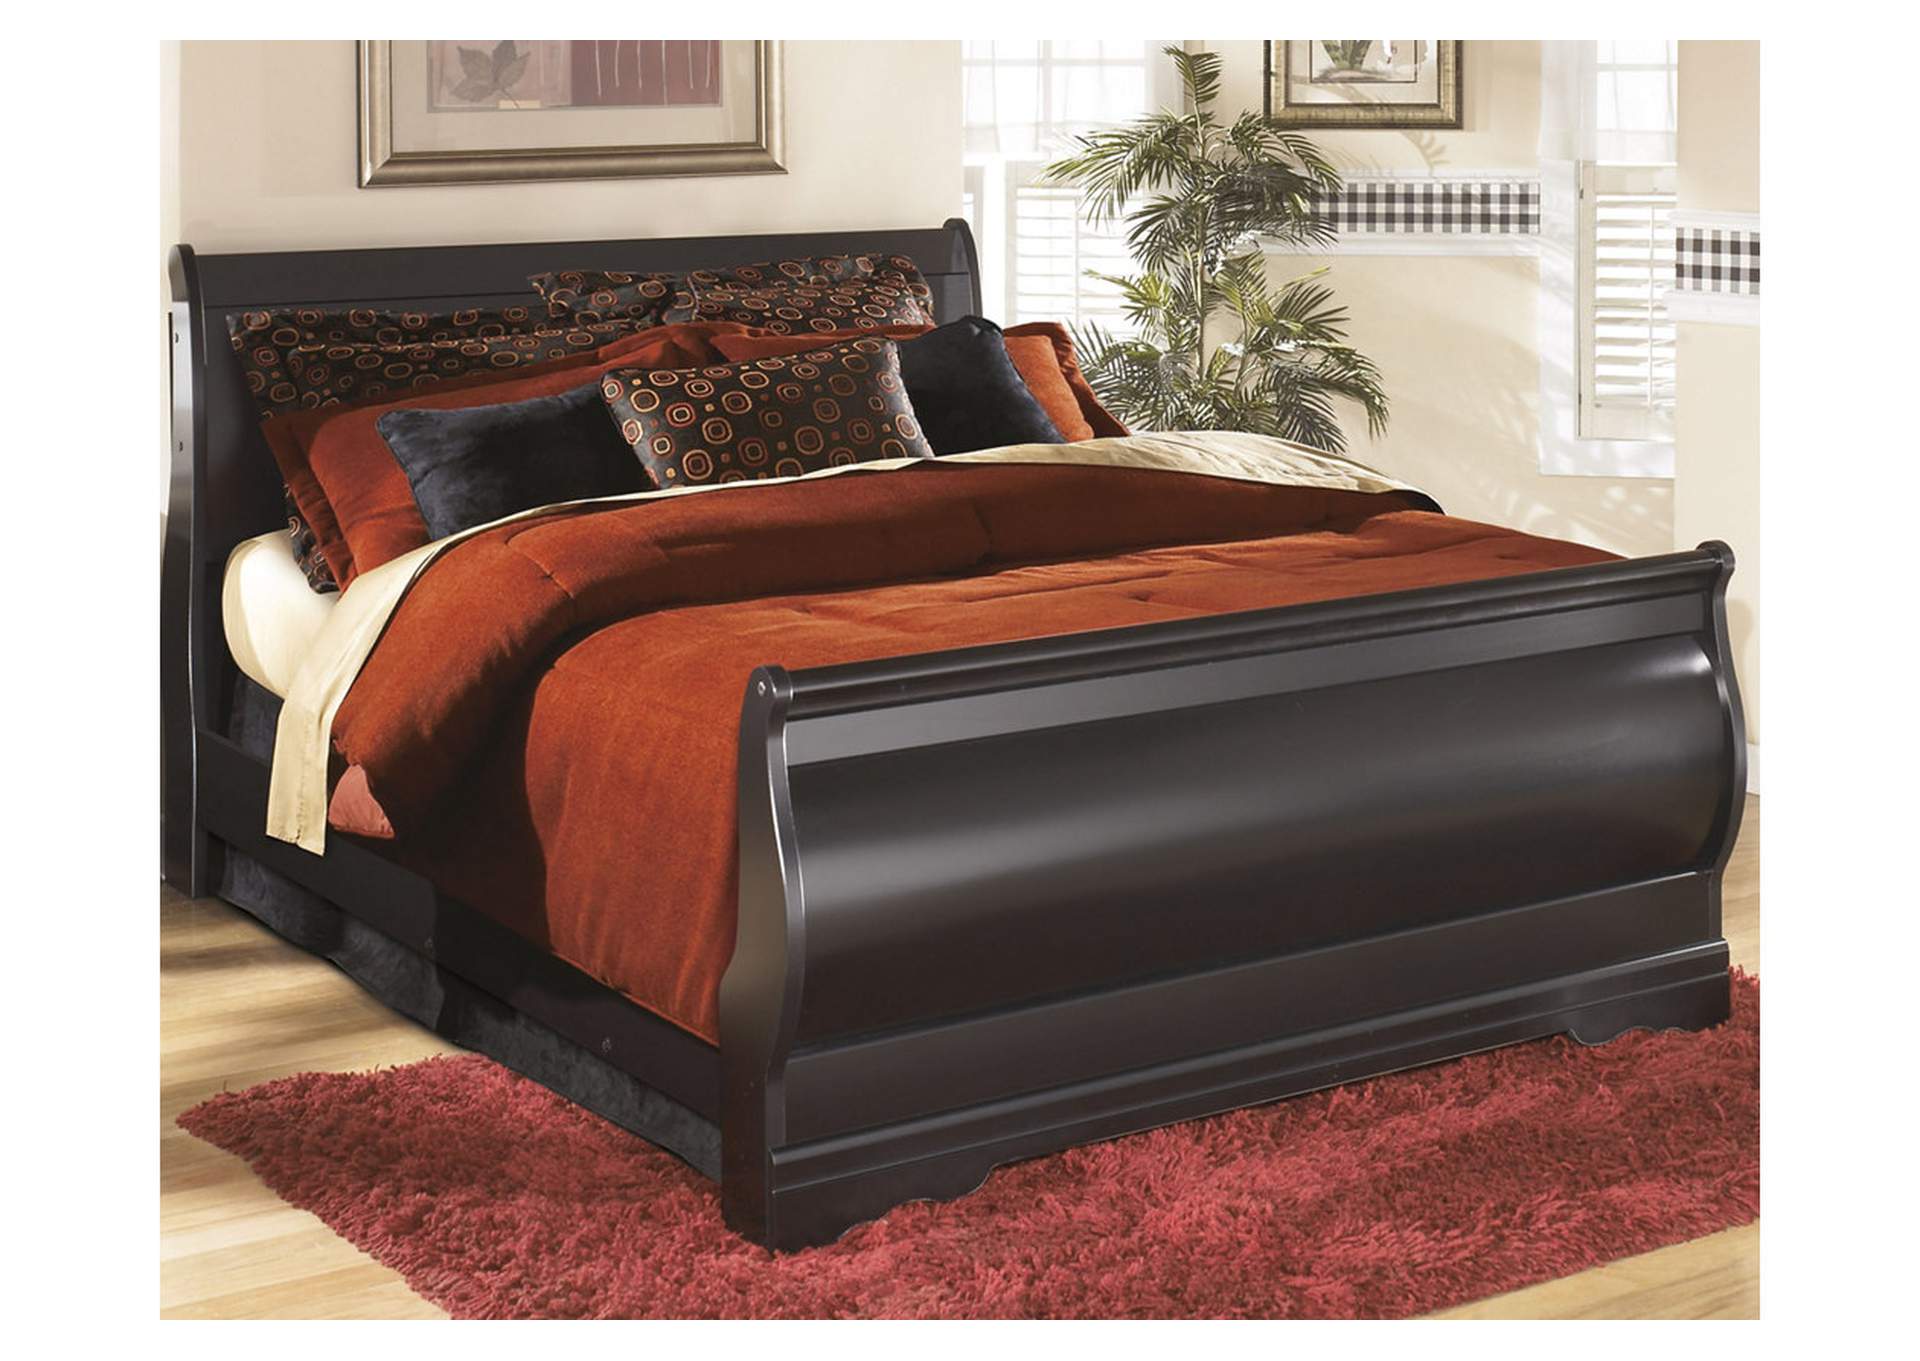 Huey Vineyard Queen Sleigh Bed with Mirrored Dresser and Nightstand,Signature Design By Ashley